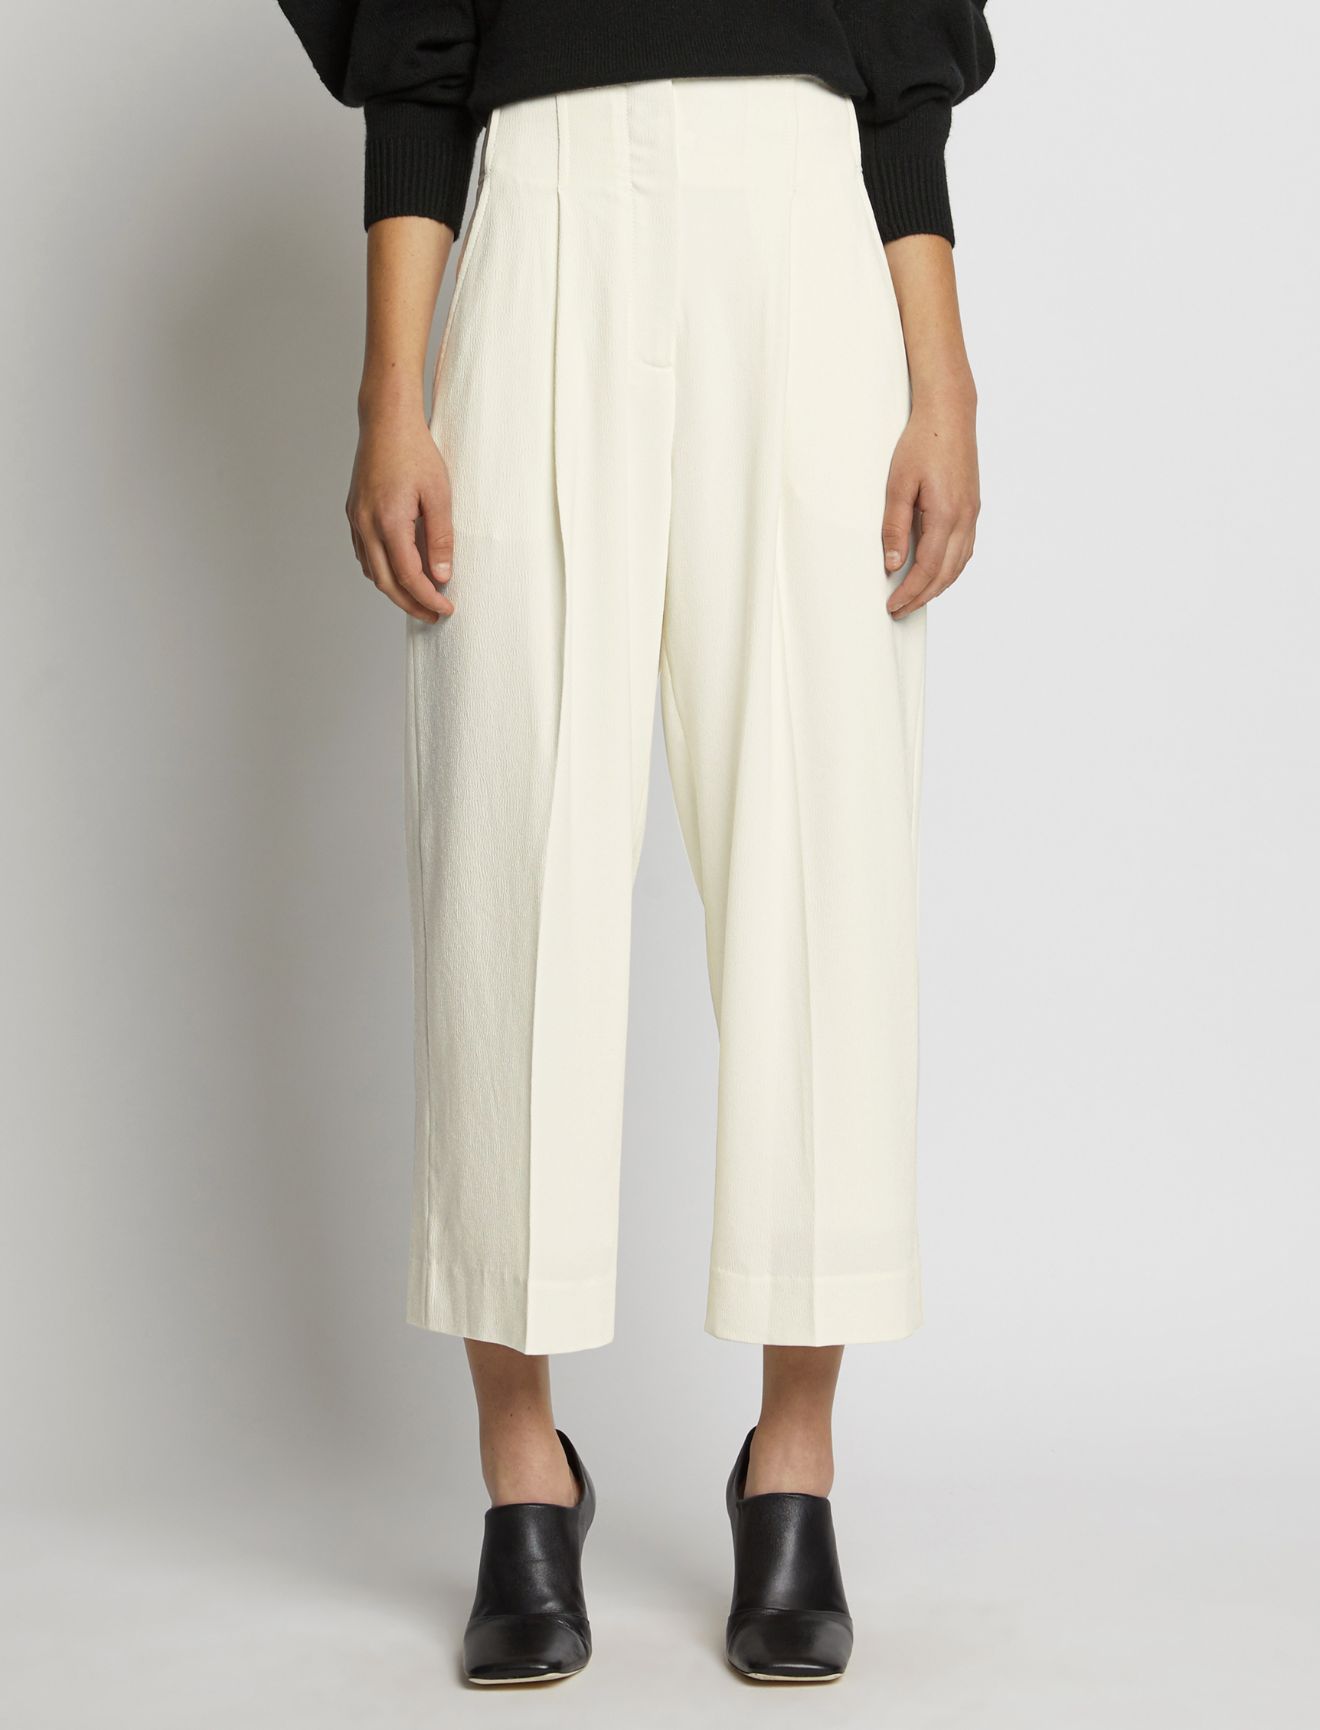 Textured Crepe High Waisted Culottes in neutrals | Proenza Schouler